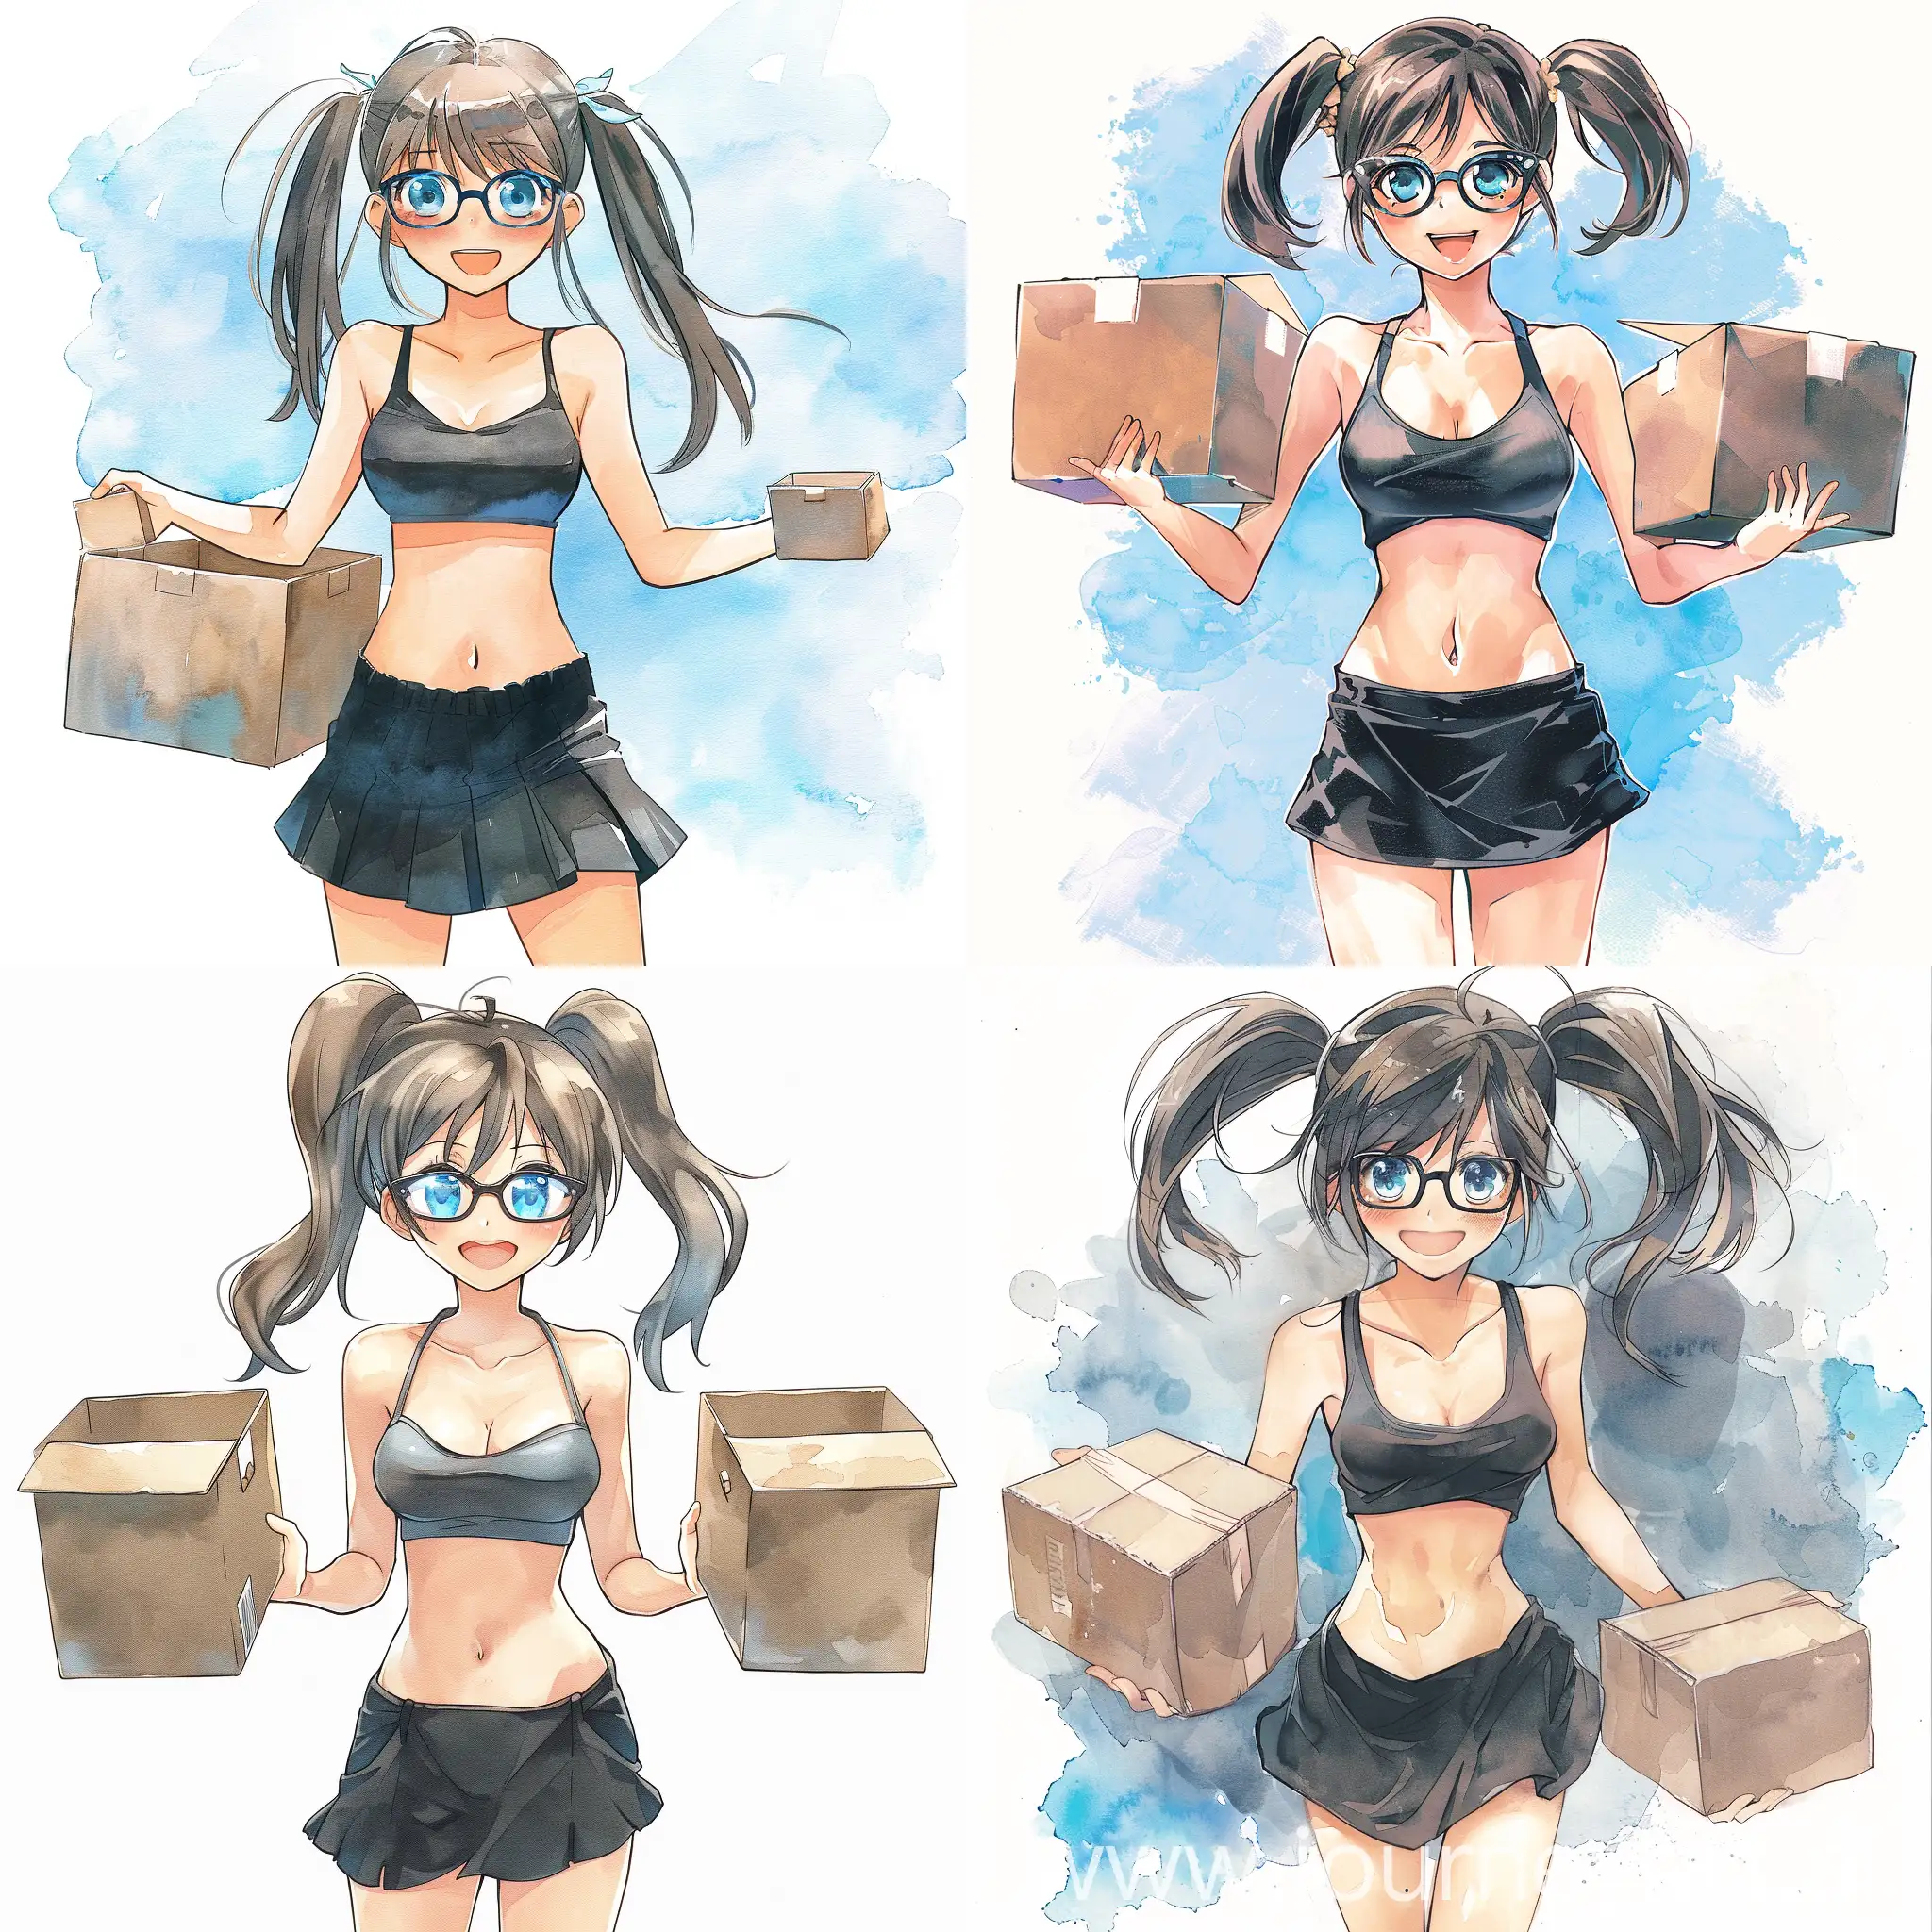 Anime-Girl-Holding-Cardboard-Box-in-High-Definition-Watercolor-Style